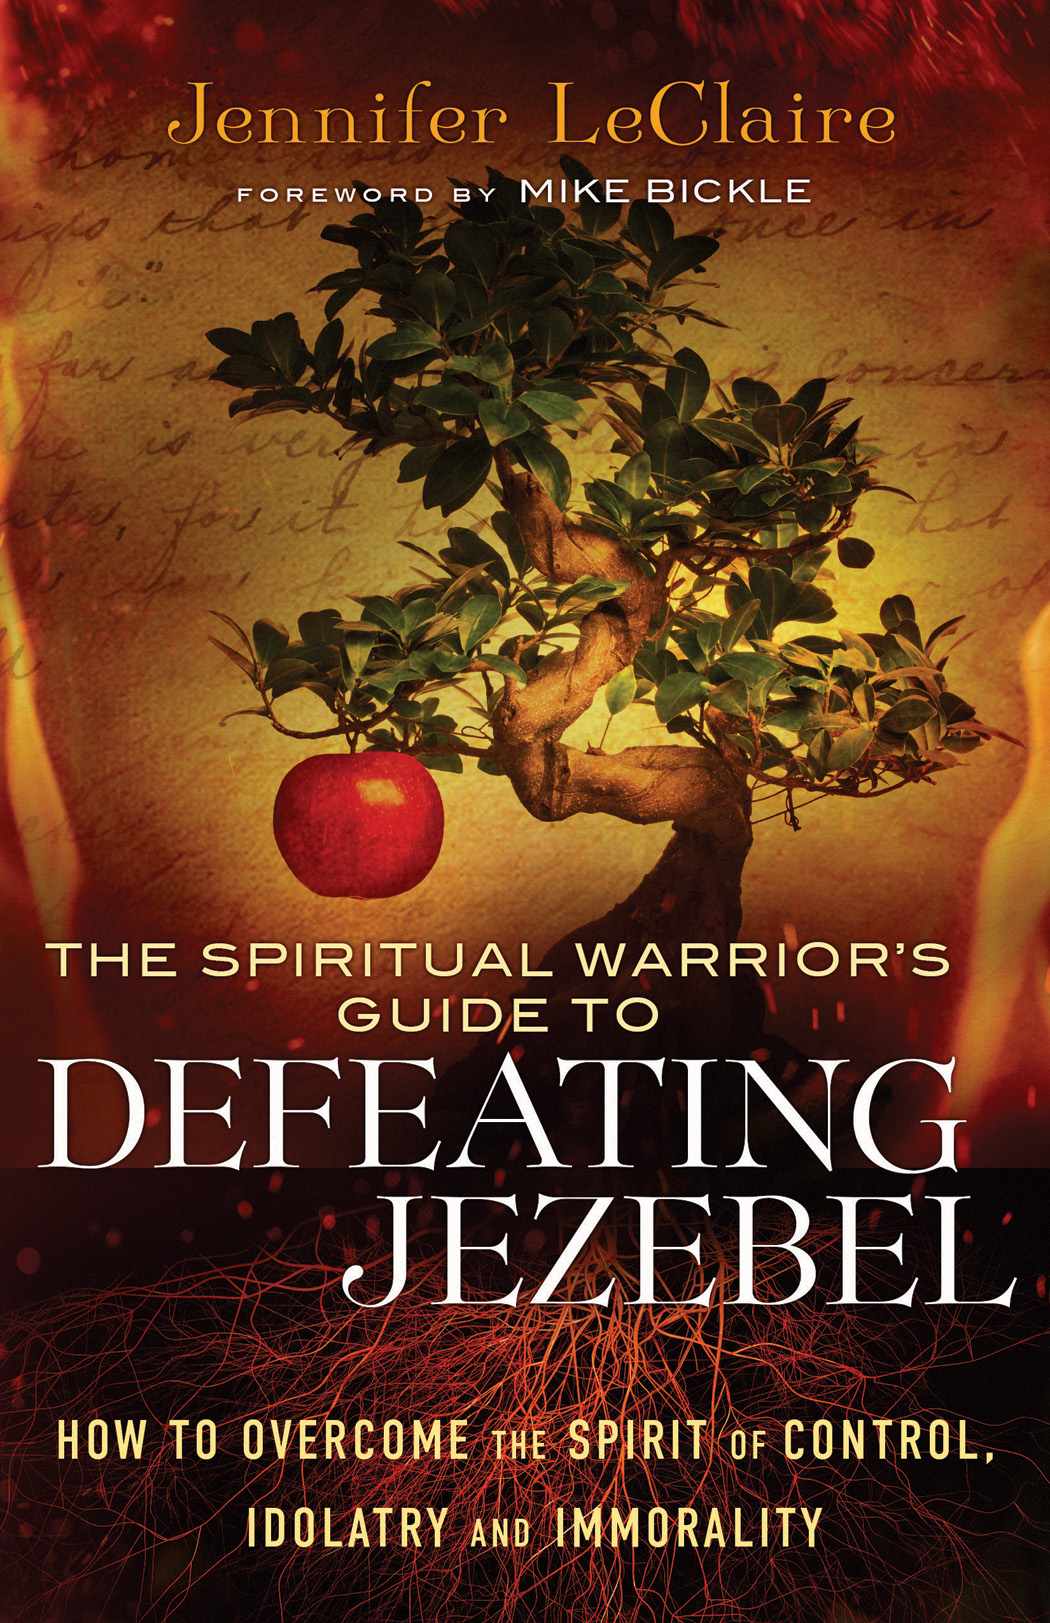 The Spiritual Warrior's Guide to Defeating Jezebel [eBook]